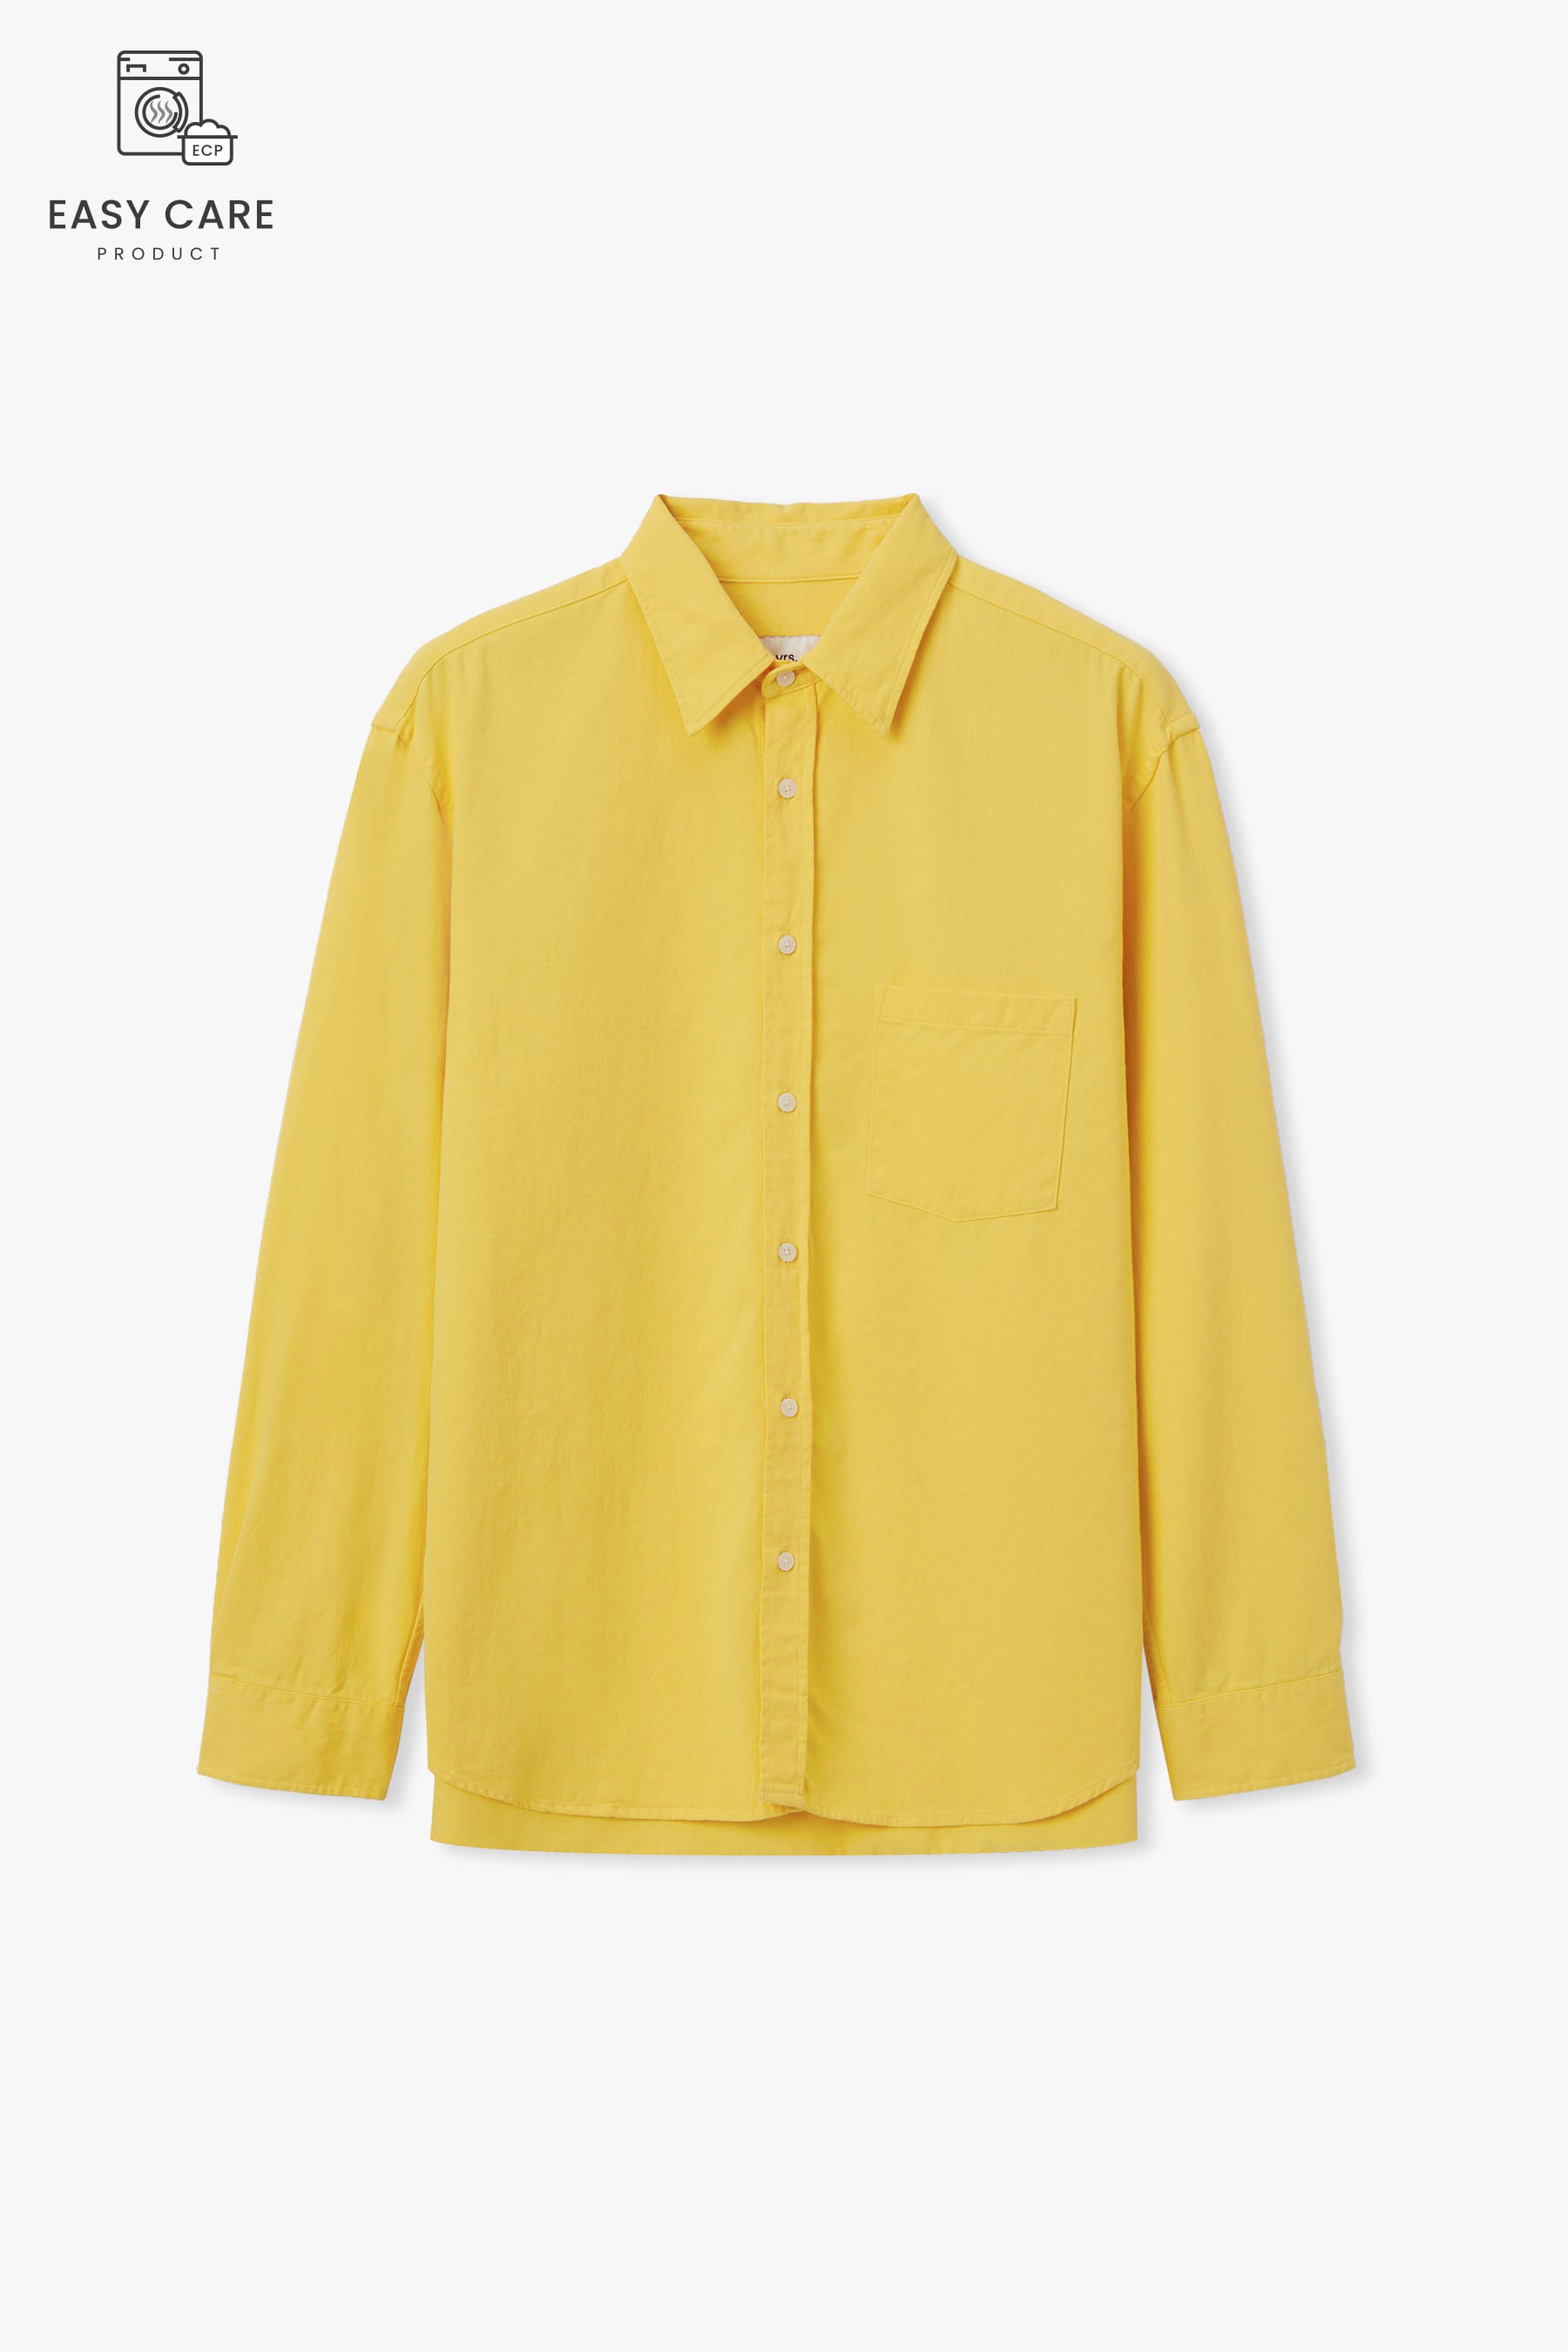 [2PO 6/12 순차발송] YELLOW DUSTY YRS POIKA COTTON DRILL SHIRTS CLASSIC FIT (ECP GARMENT PROCESS)